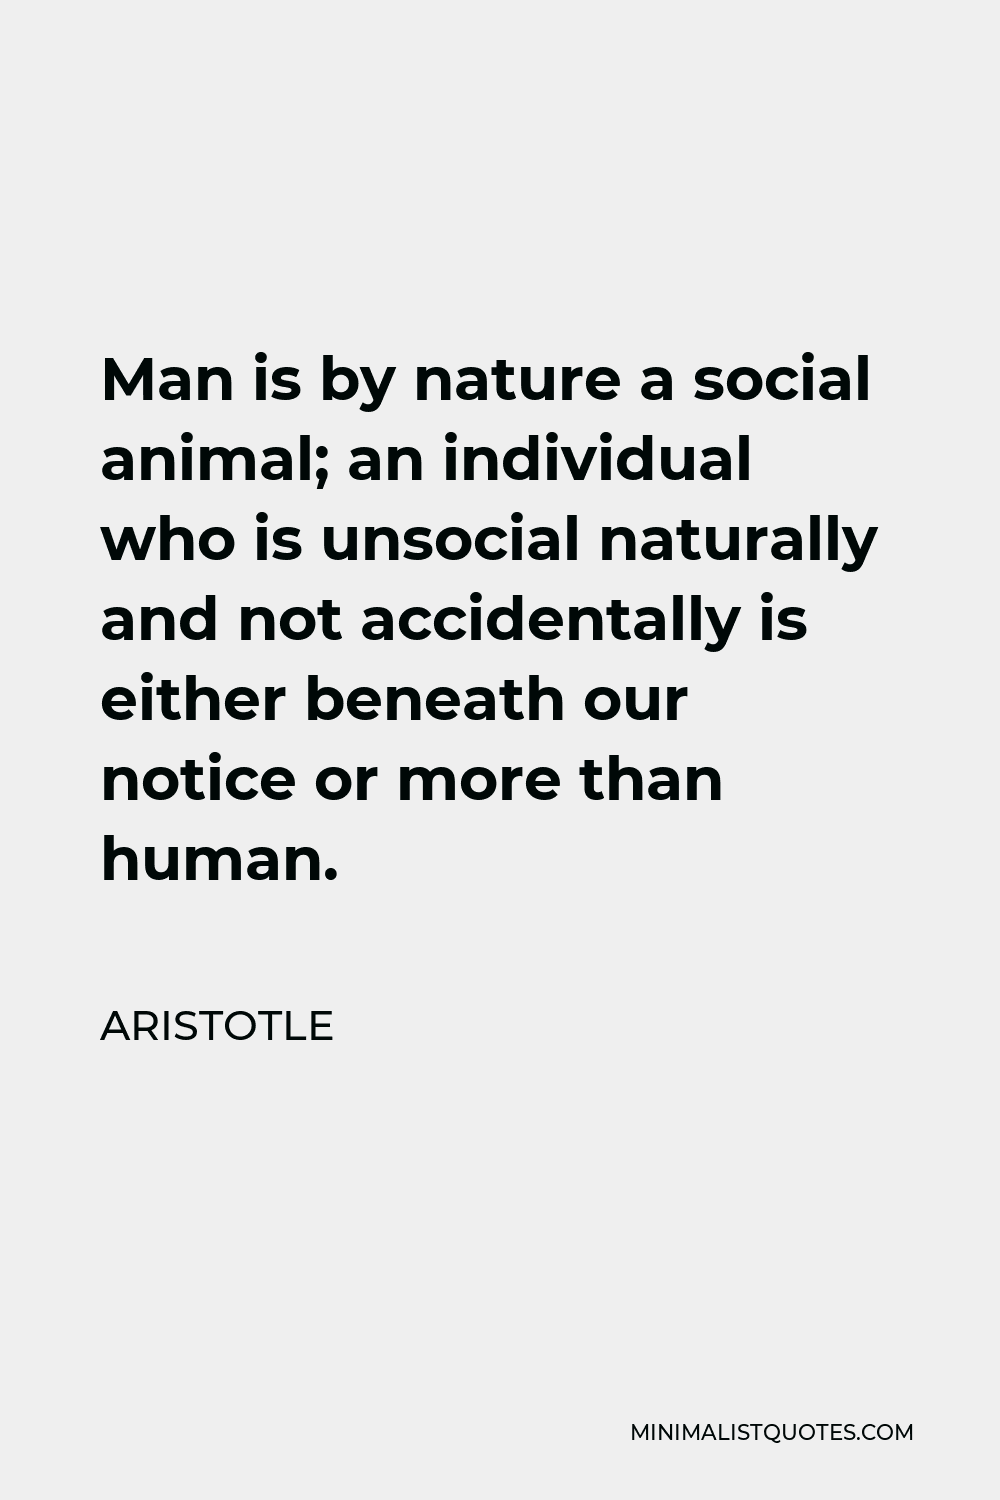 Aristotle Quote: Man is by nature a social animal; an individual who is  unsocial naturally and not accidentally is either beneath our notice or  more than human.